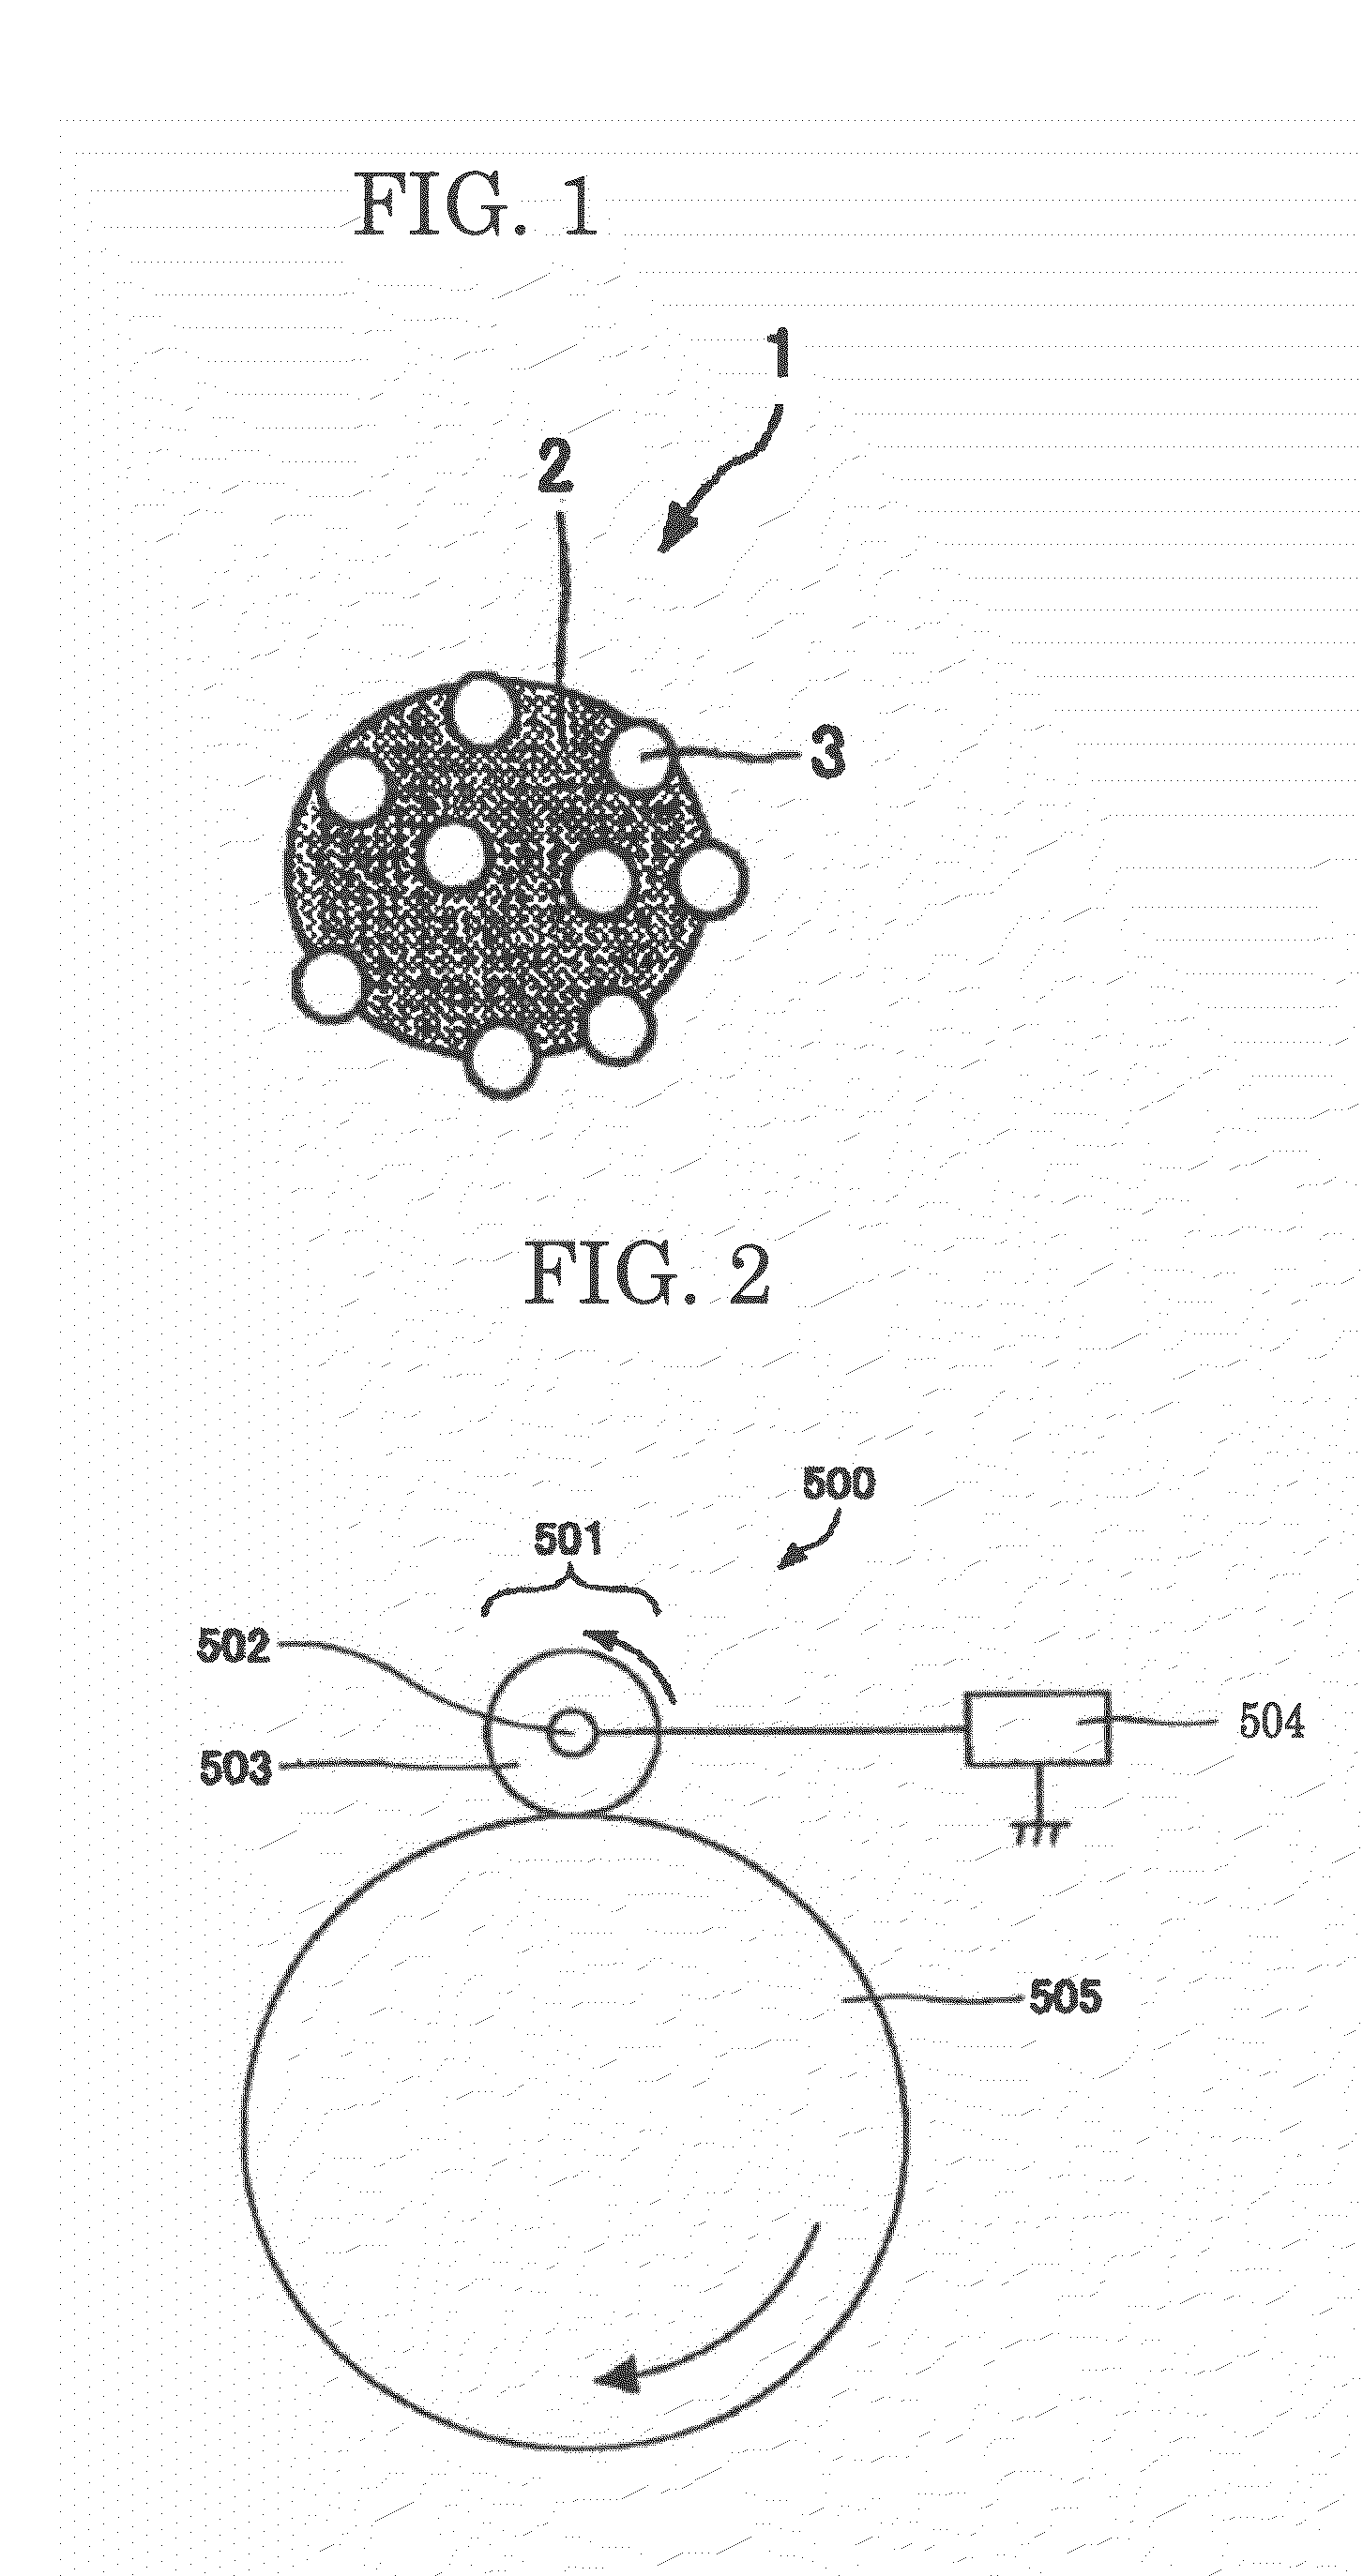 Toner, image forming method using the toner, and image forming apparatus using the toner